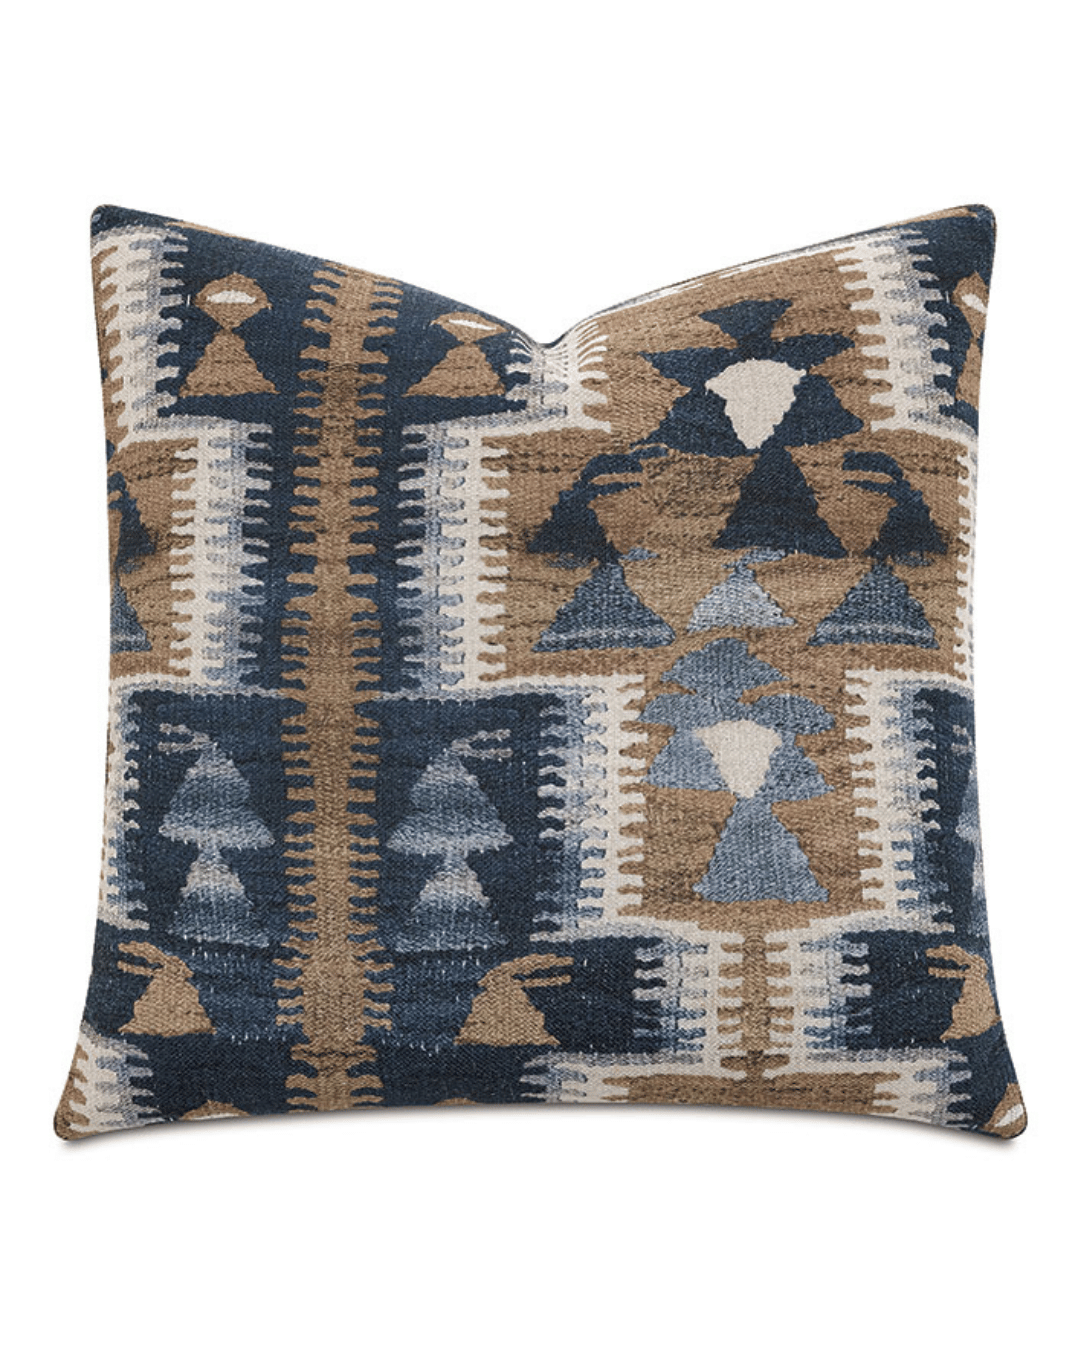 Decorative pillow featuring a geometric pattern in shades of blue, beige, and brown. The design includes symmetrical shapes and bungalow-inspired motifs.

Product: Eastern Accents HIG Graphic Decorative Pillow